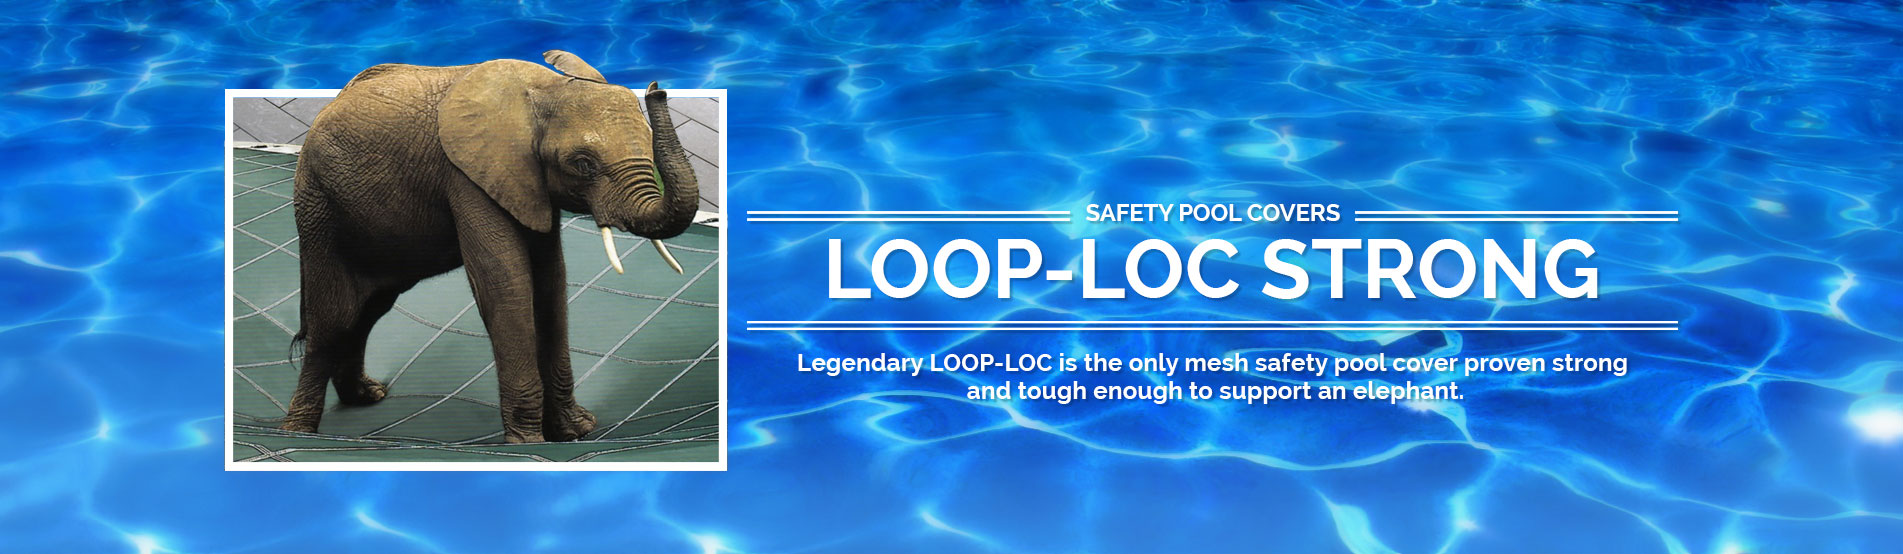 Loop Loc Strong banner image